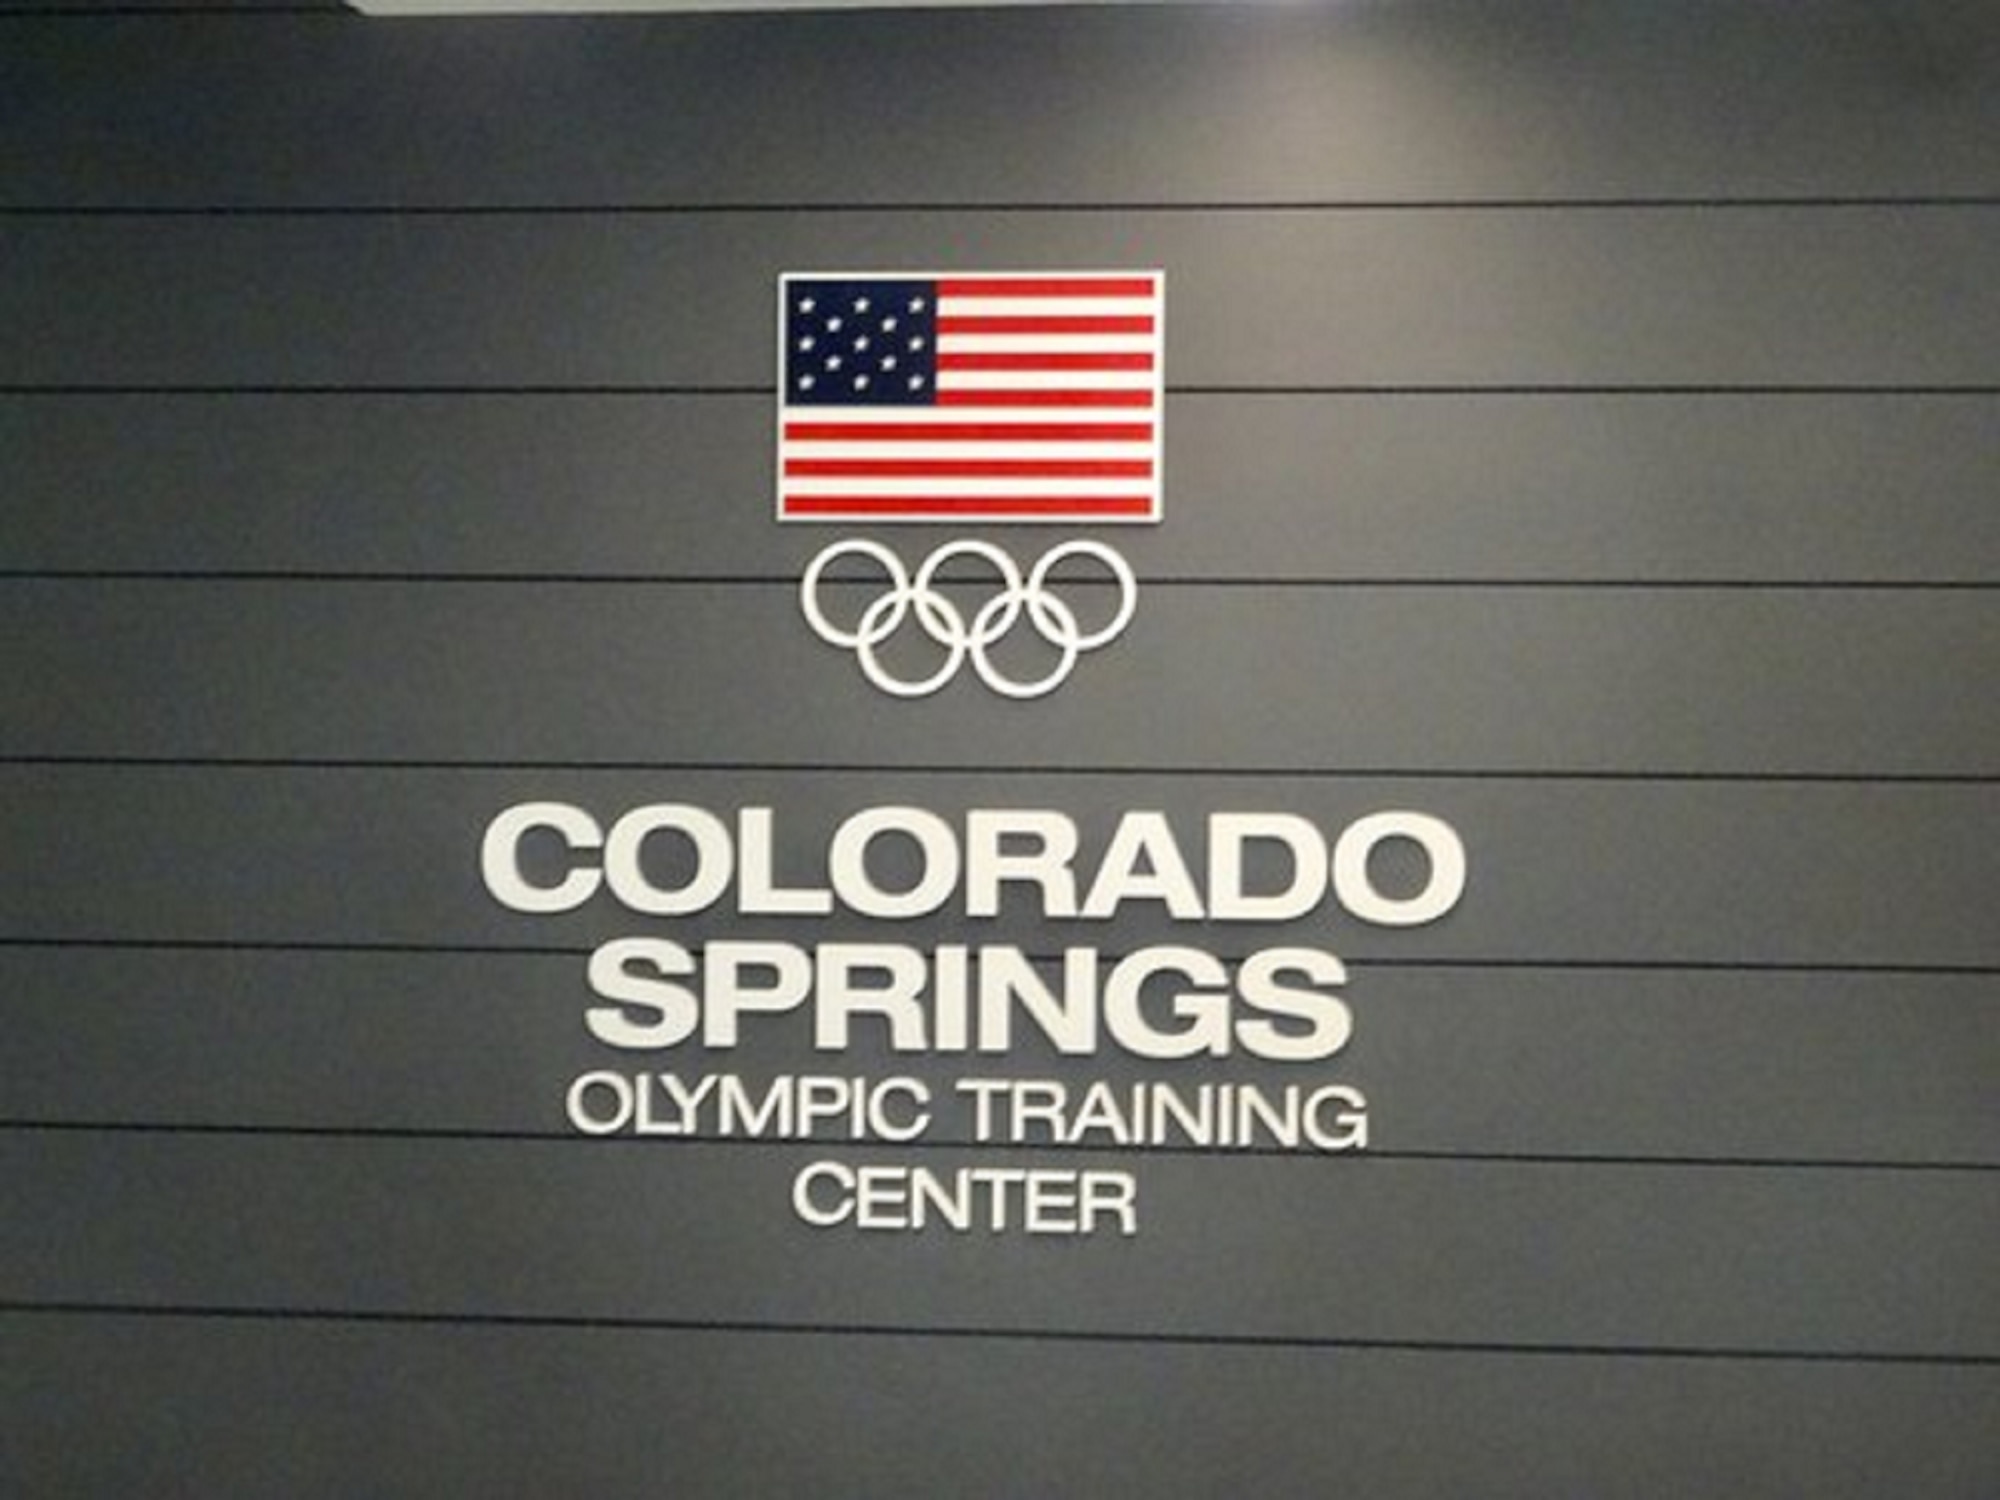 Airman and Guardian Olympians will have a new home, as the Department of the Air Force will be relocating the World Class Athlete and Air Force Shooting programs to Colorado Springs, Colo.